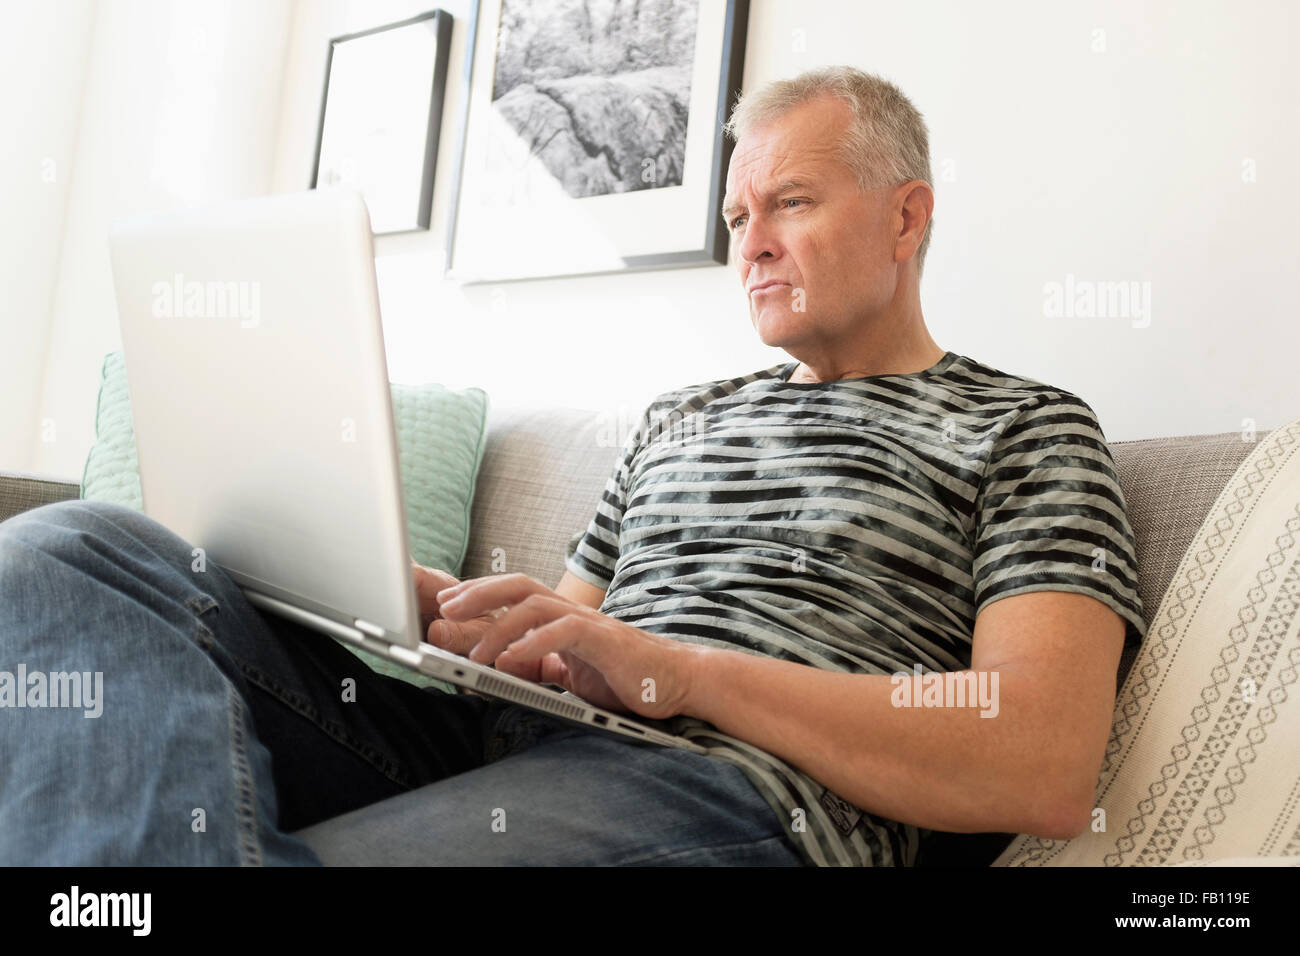 Man sitting on sofa using laptop Banque D'Images